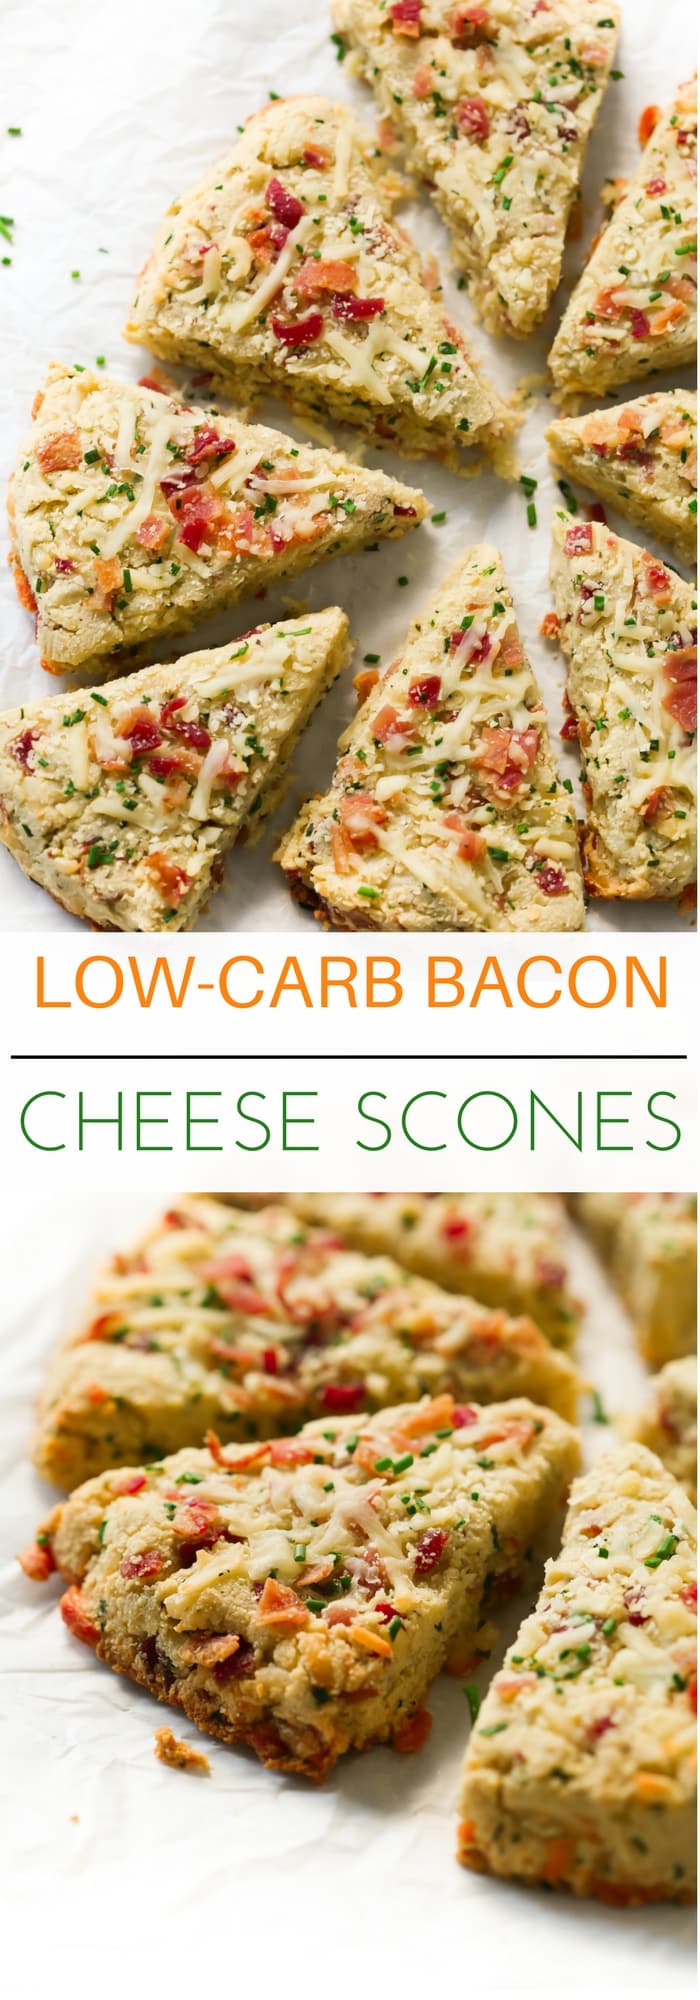 Low-carb Bacon and Cheese Scones - These Low-carb Bacon and Cheese Scones are gluten-free, ultra-simple to whip up and they are made with almond flour, coconut flour, bacon, cheese and chives.